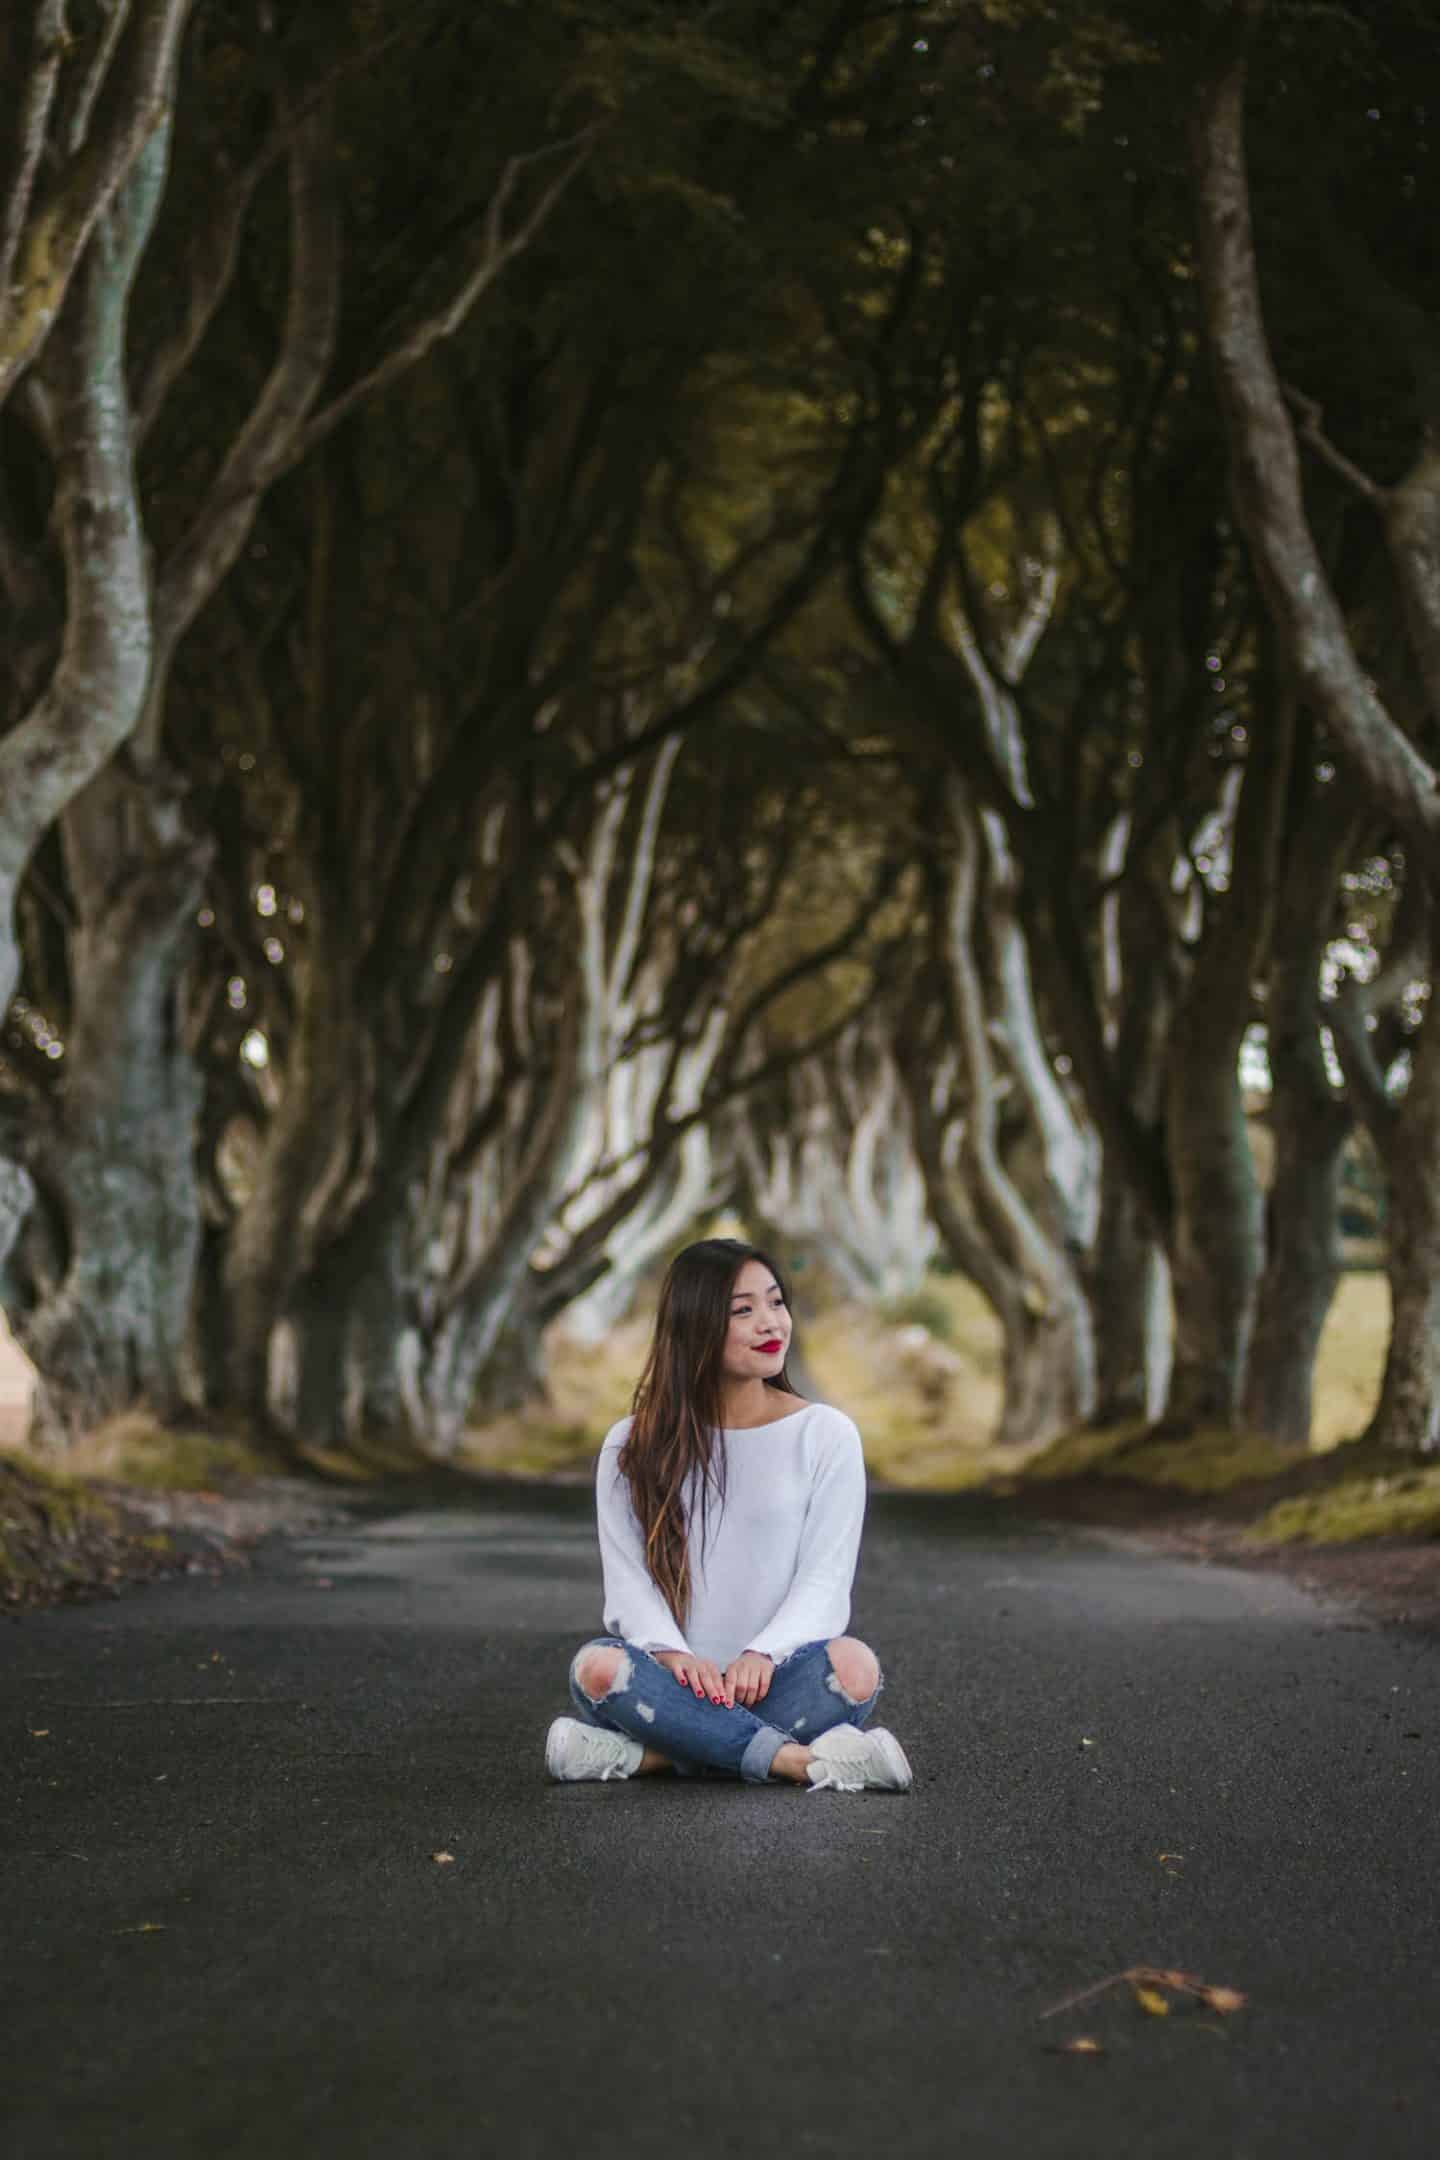 The Dark Hedges is one of the most epic locations on your Ireland road trip itinerary